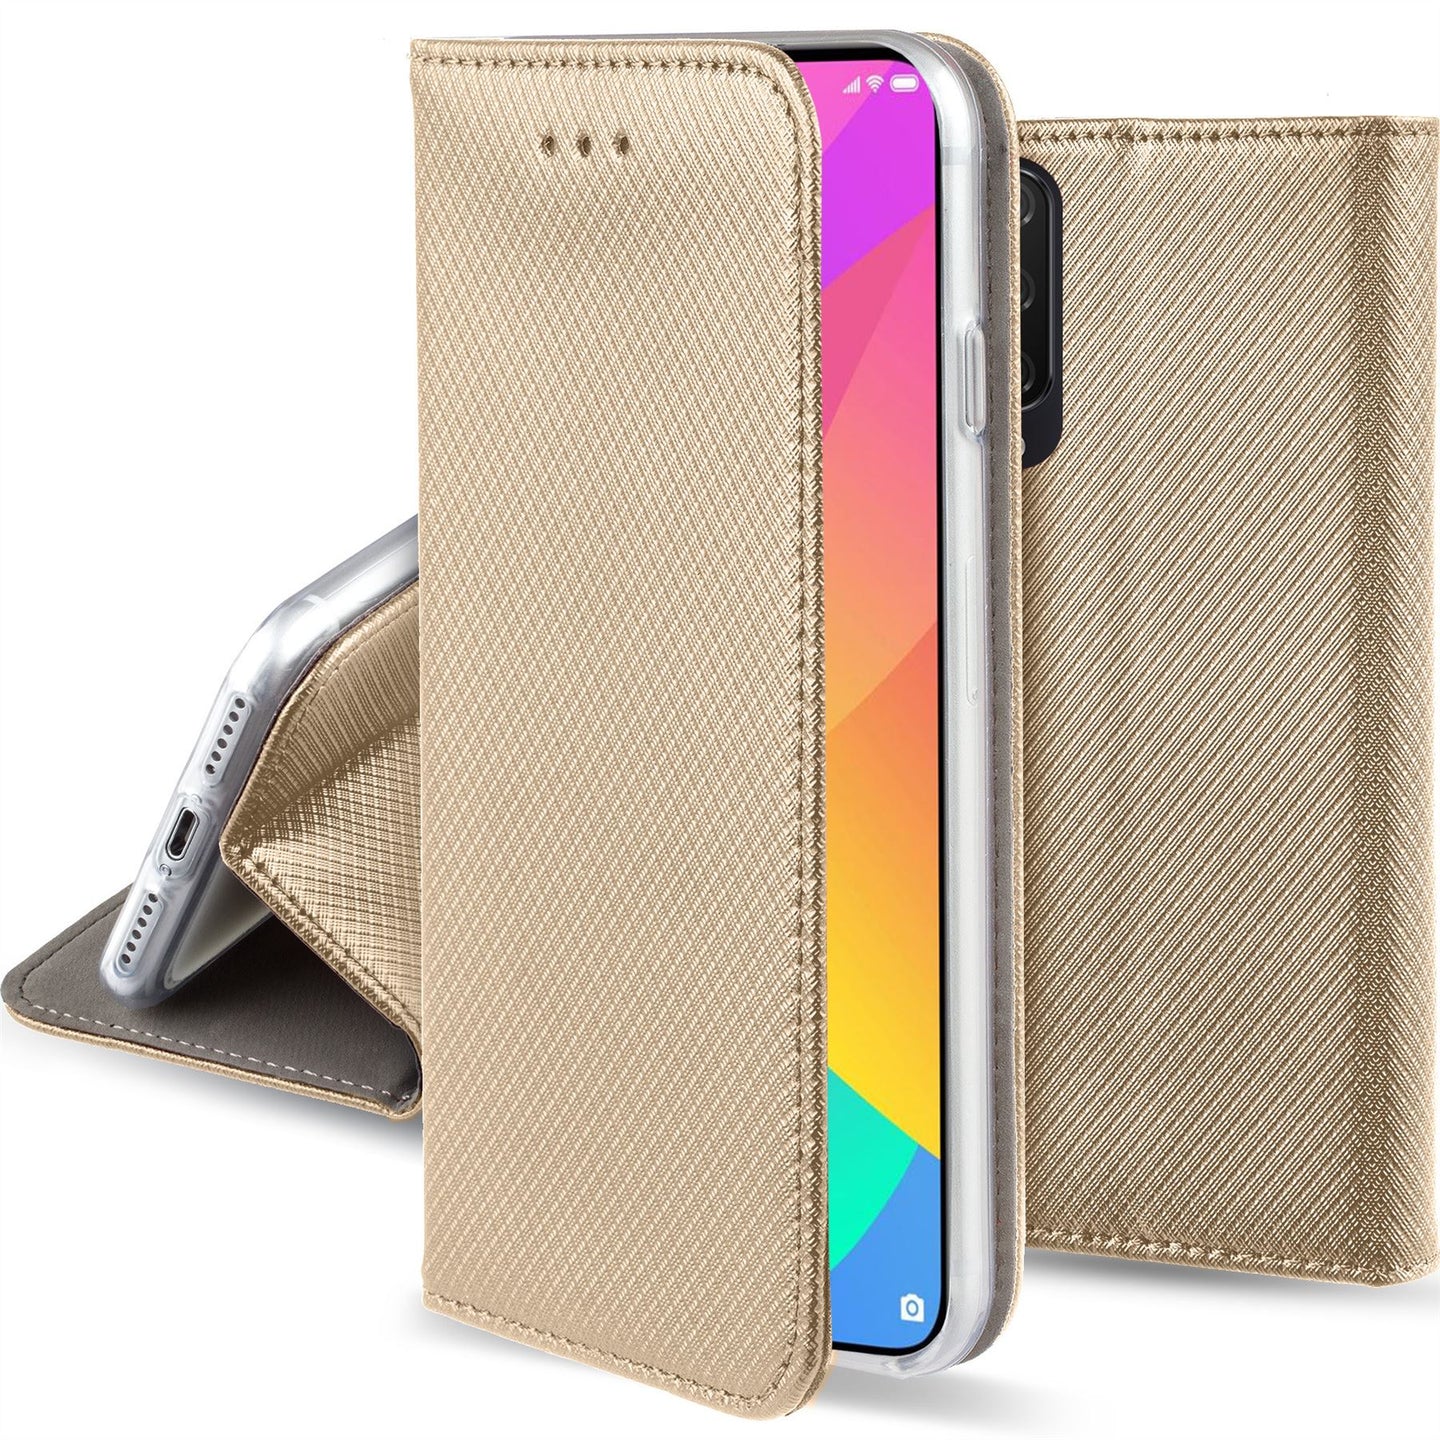 Moozy Case Flip Cover for Xiaomi Mi 9 Lite, Mi A3 Lite, Gold - Smart Magnetic Flip Case with Card Holder and Stand